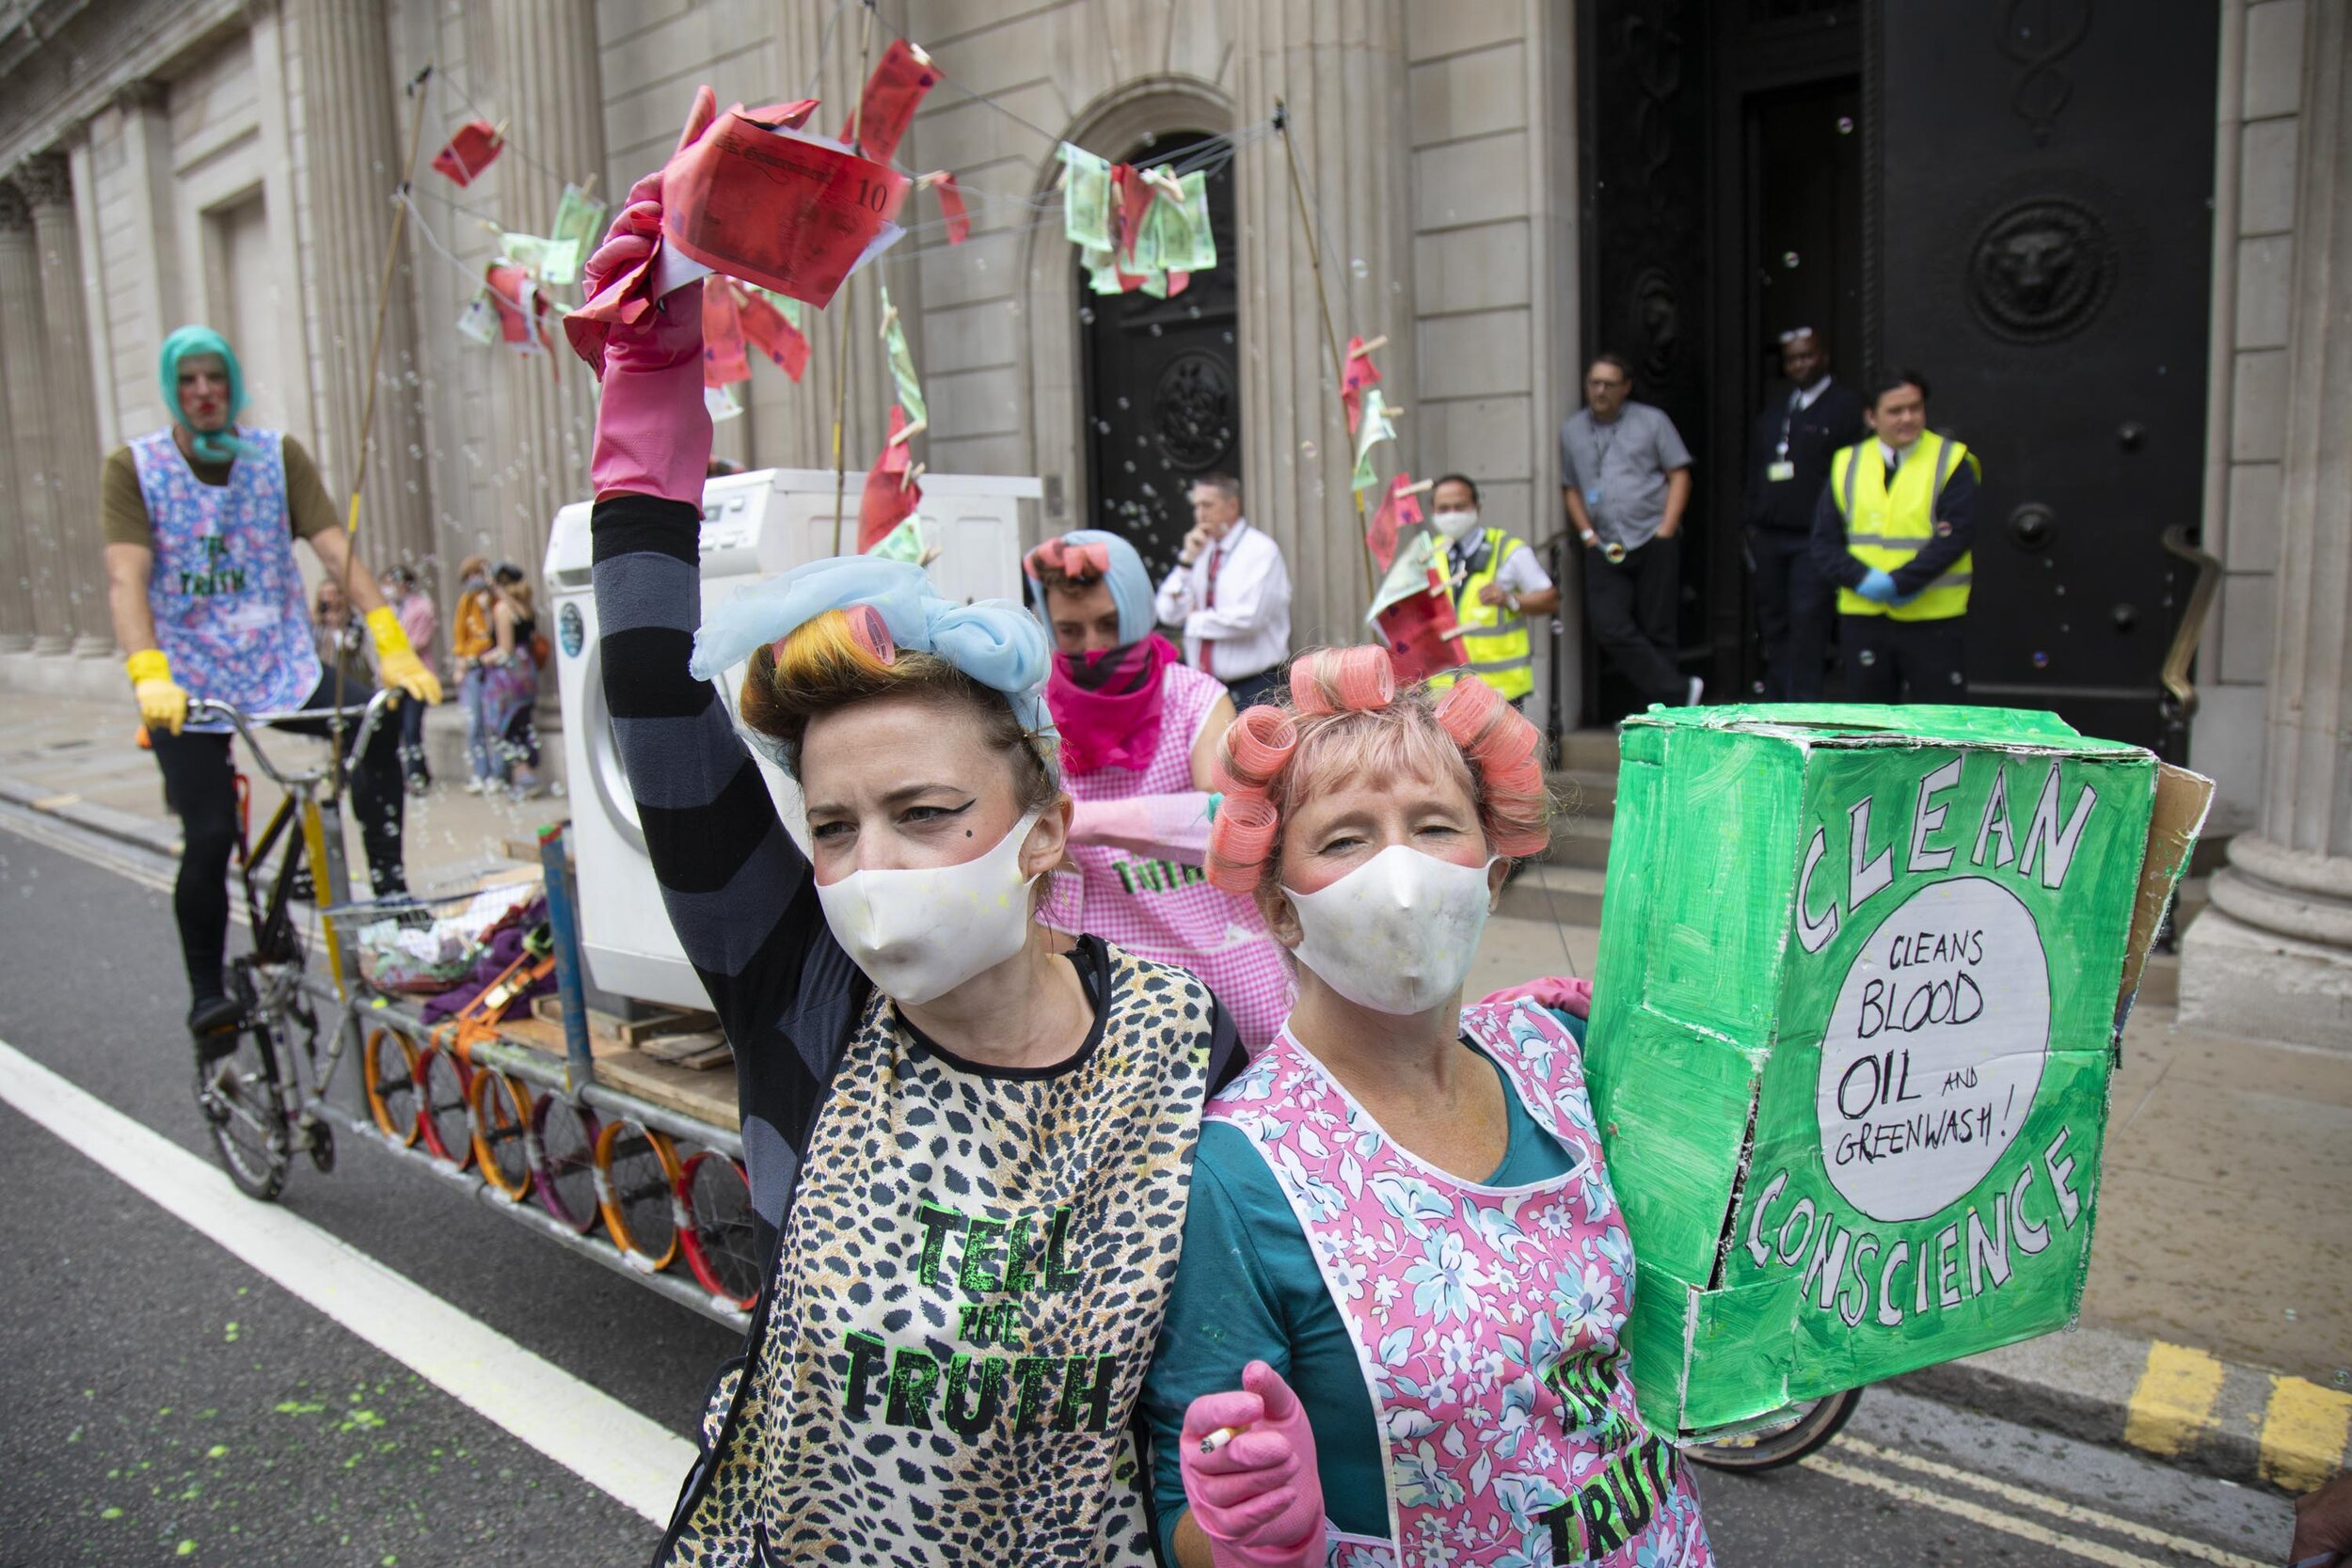  ‘Dirty Scrubbers’ old fashioned washer-women launder the ‘dirty money’ and greenwash stains outside the Bank of England in a performance designed to highlight the corruption of big business and banking. 